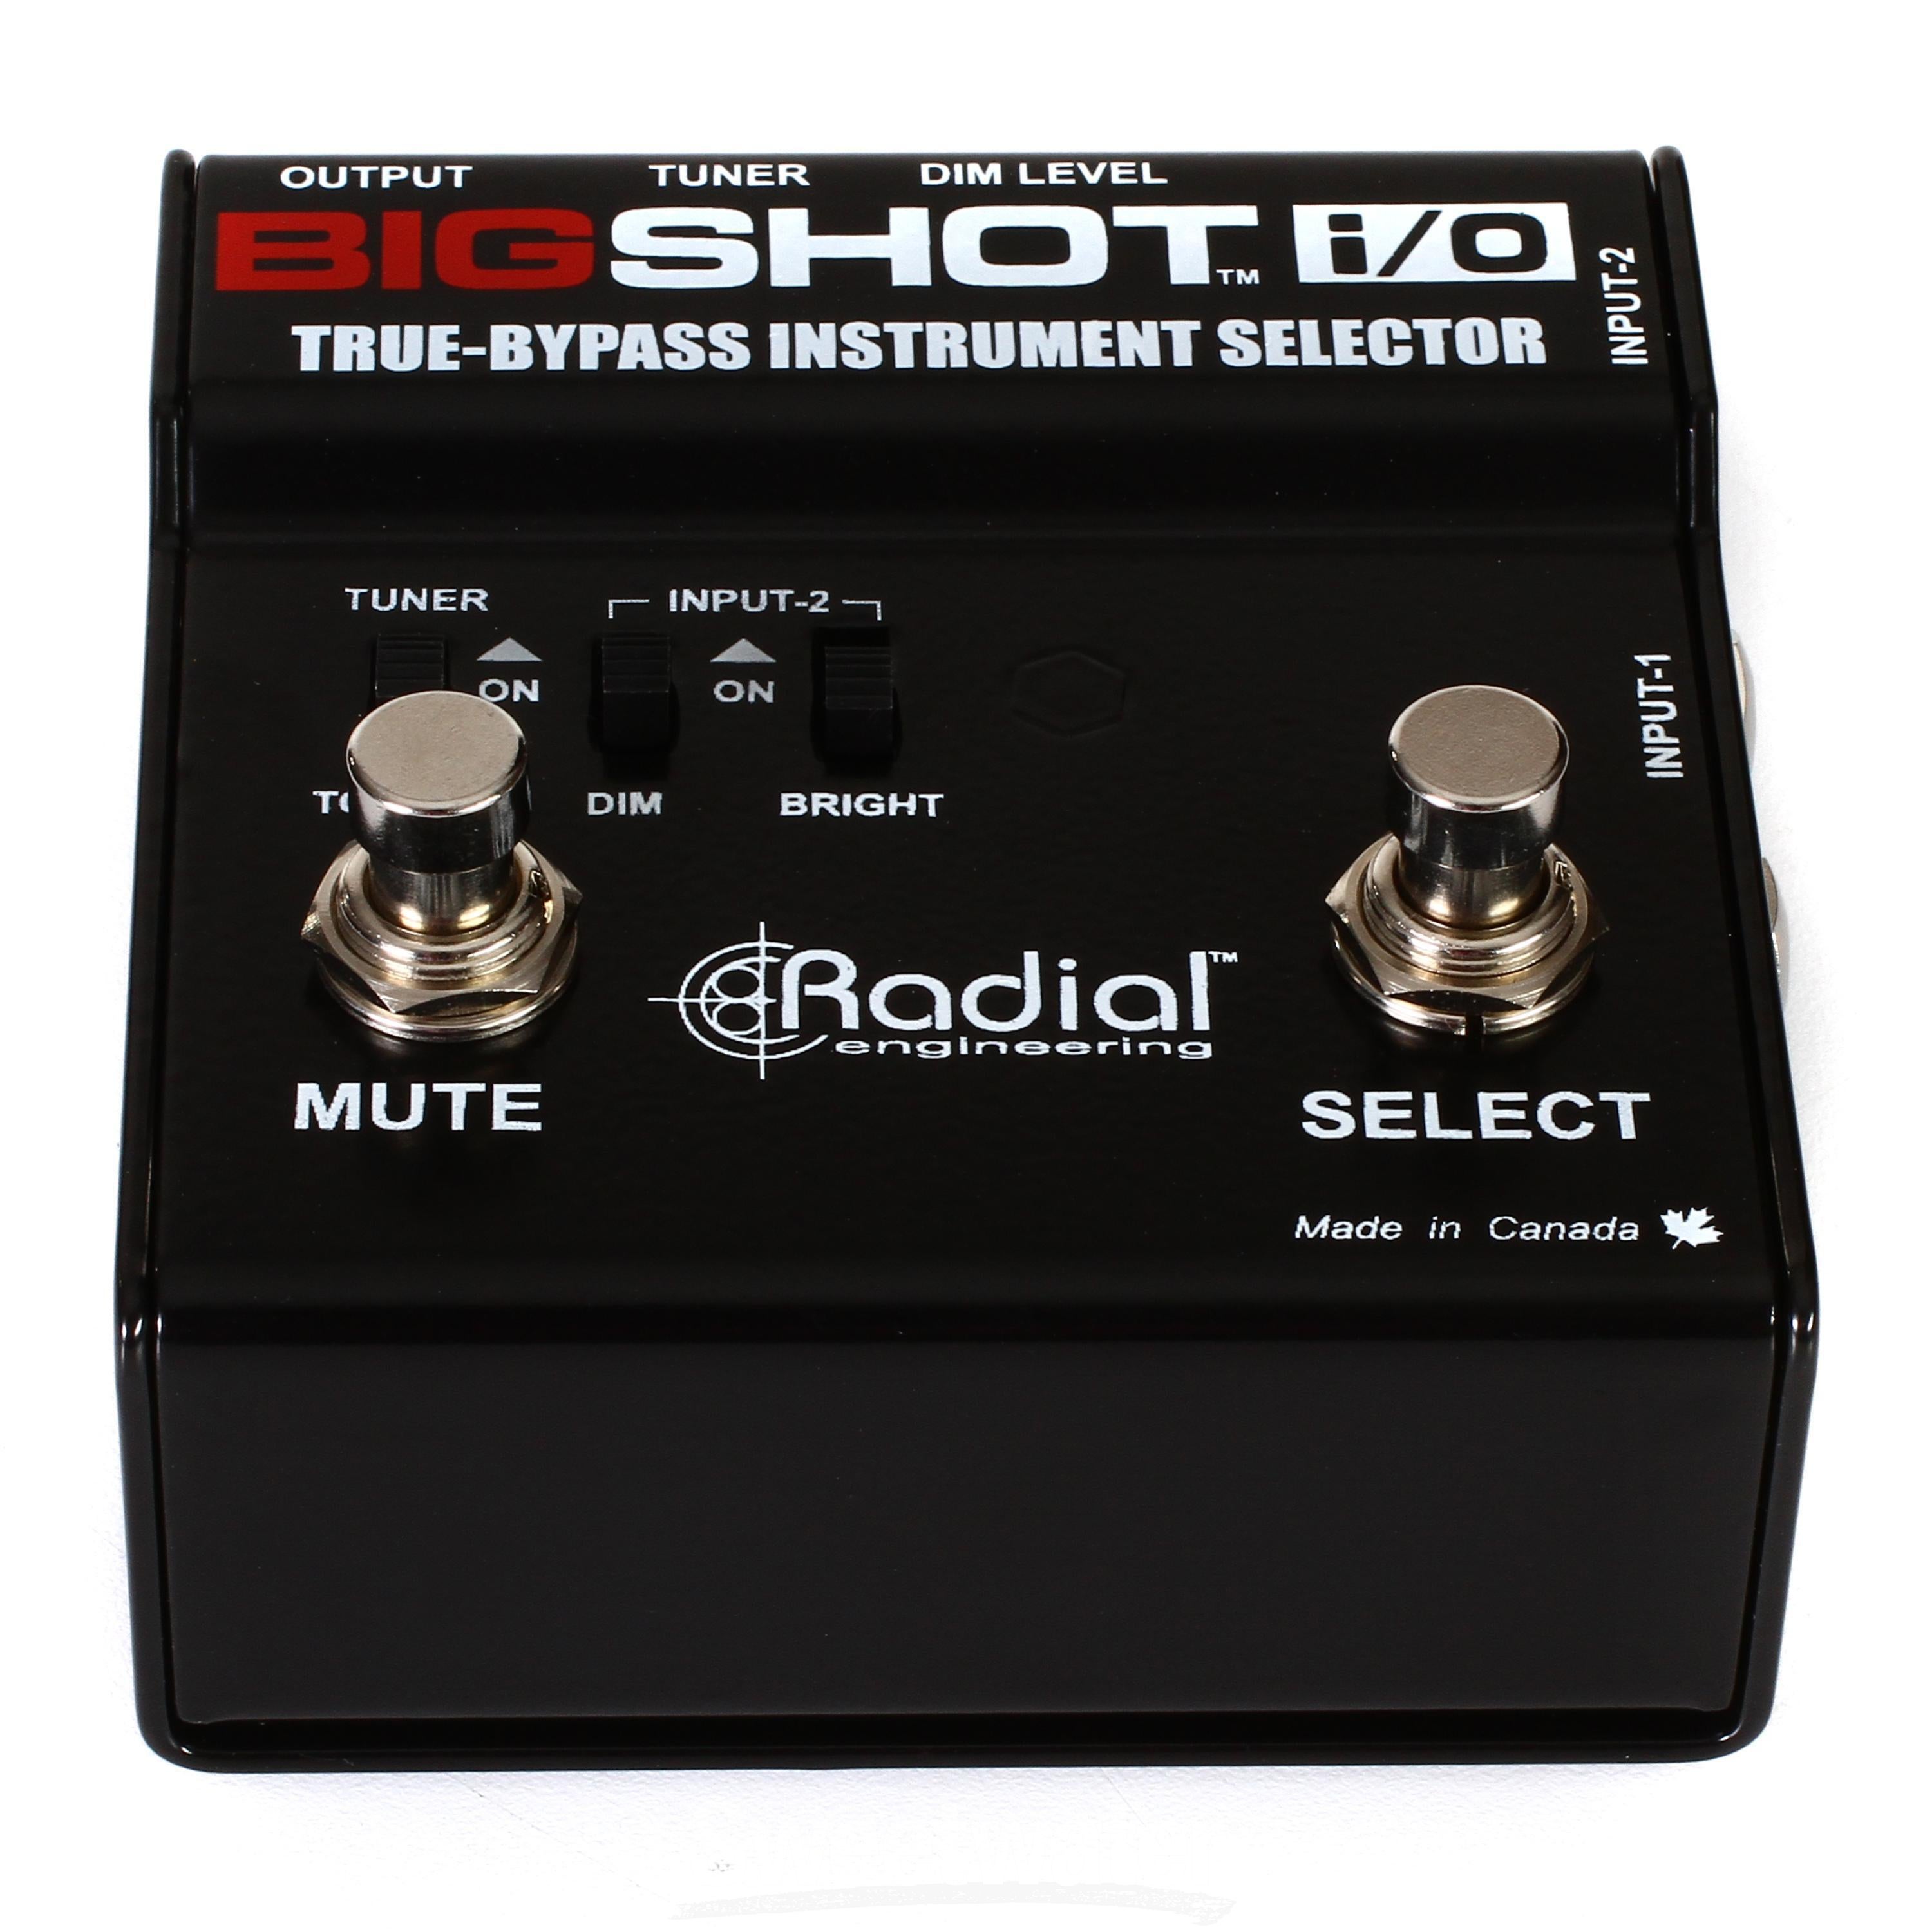 Radial BigShot i/o True Bypass Instrument Selector Pedal Reviews